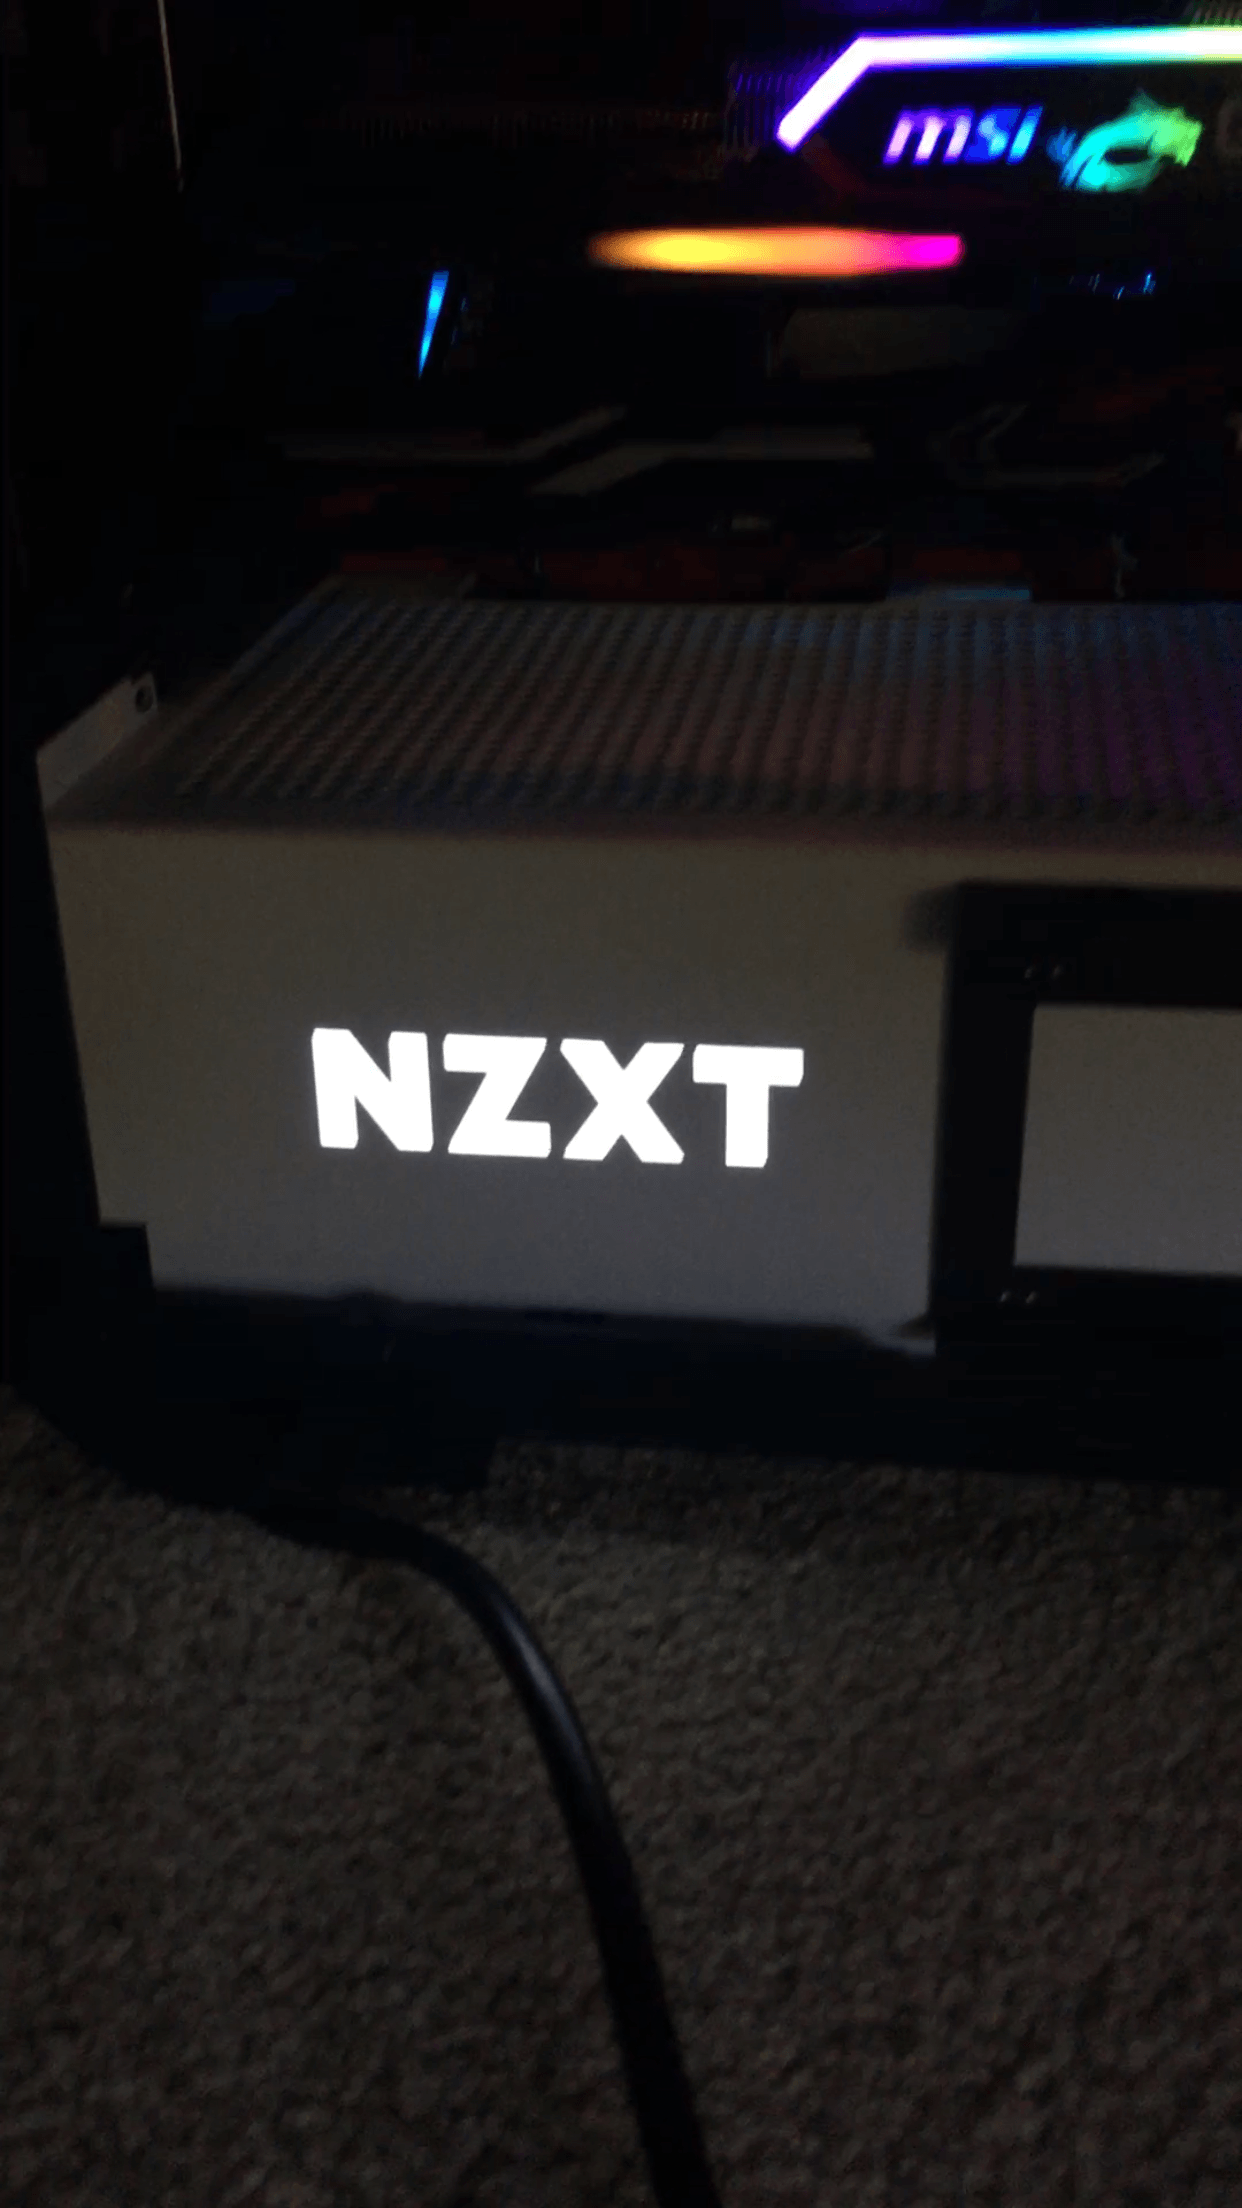 NZXT Logo - The glowing NZXT logo on the case is kinda bright and only white ...